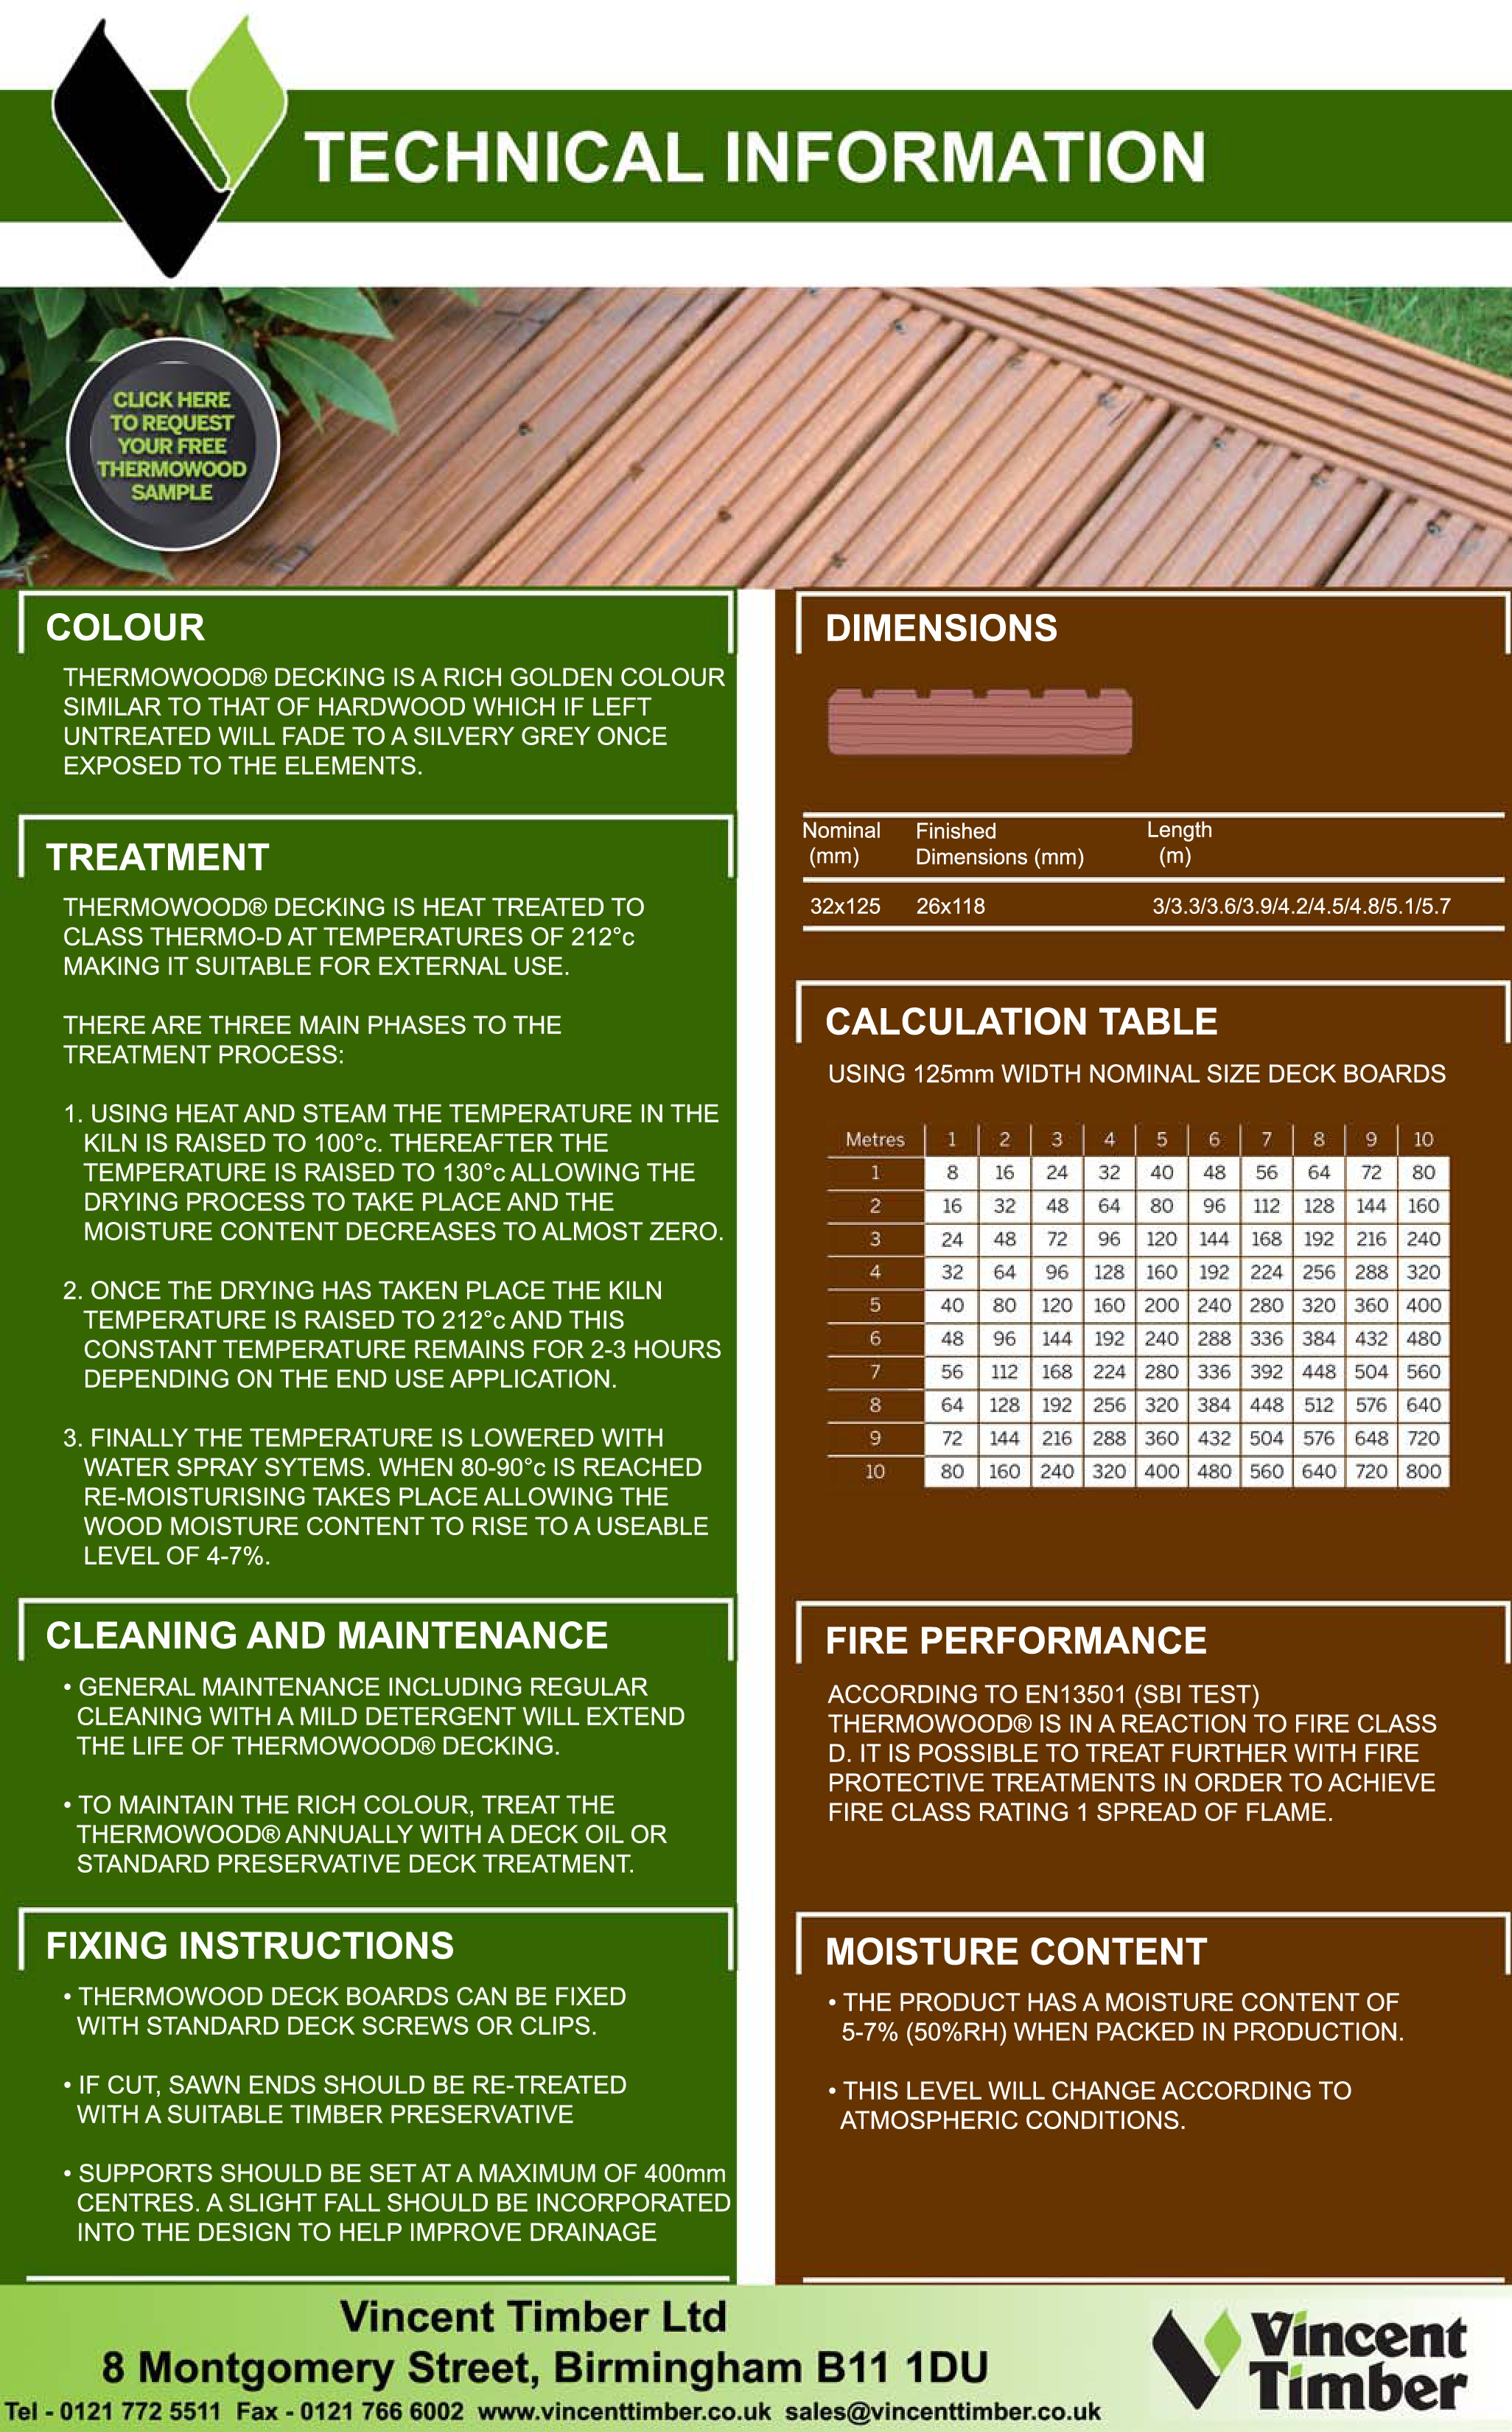 Technical information for Thermowood Decking